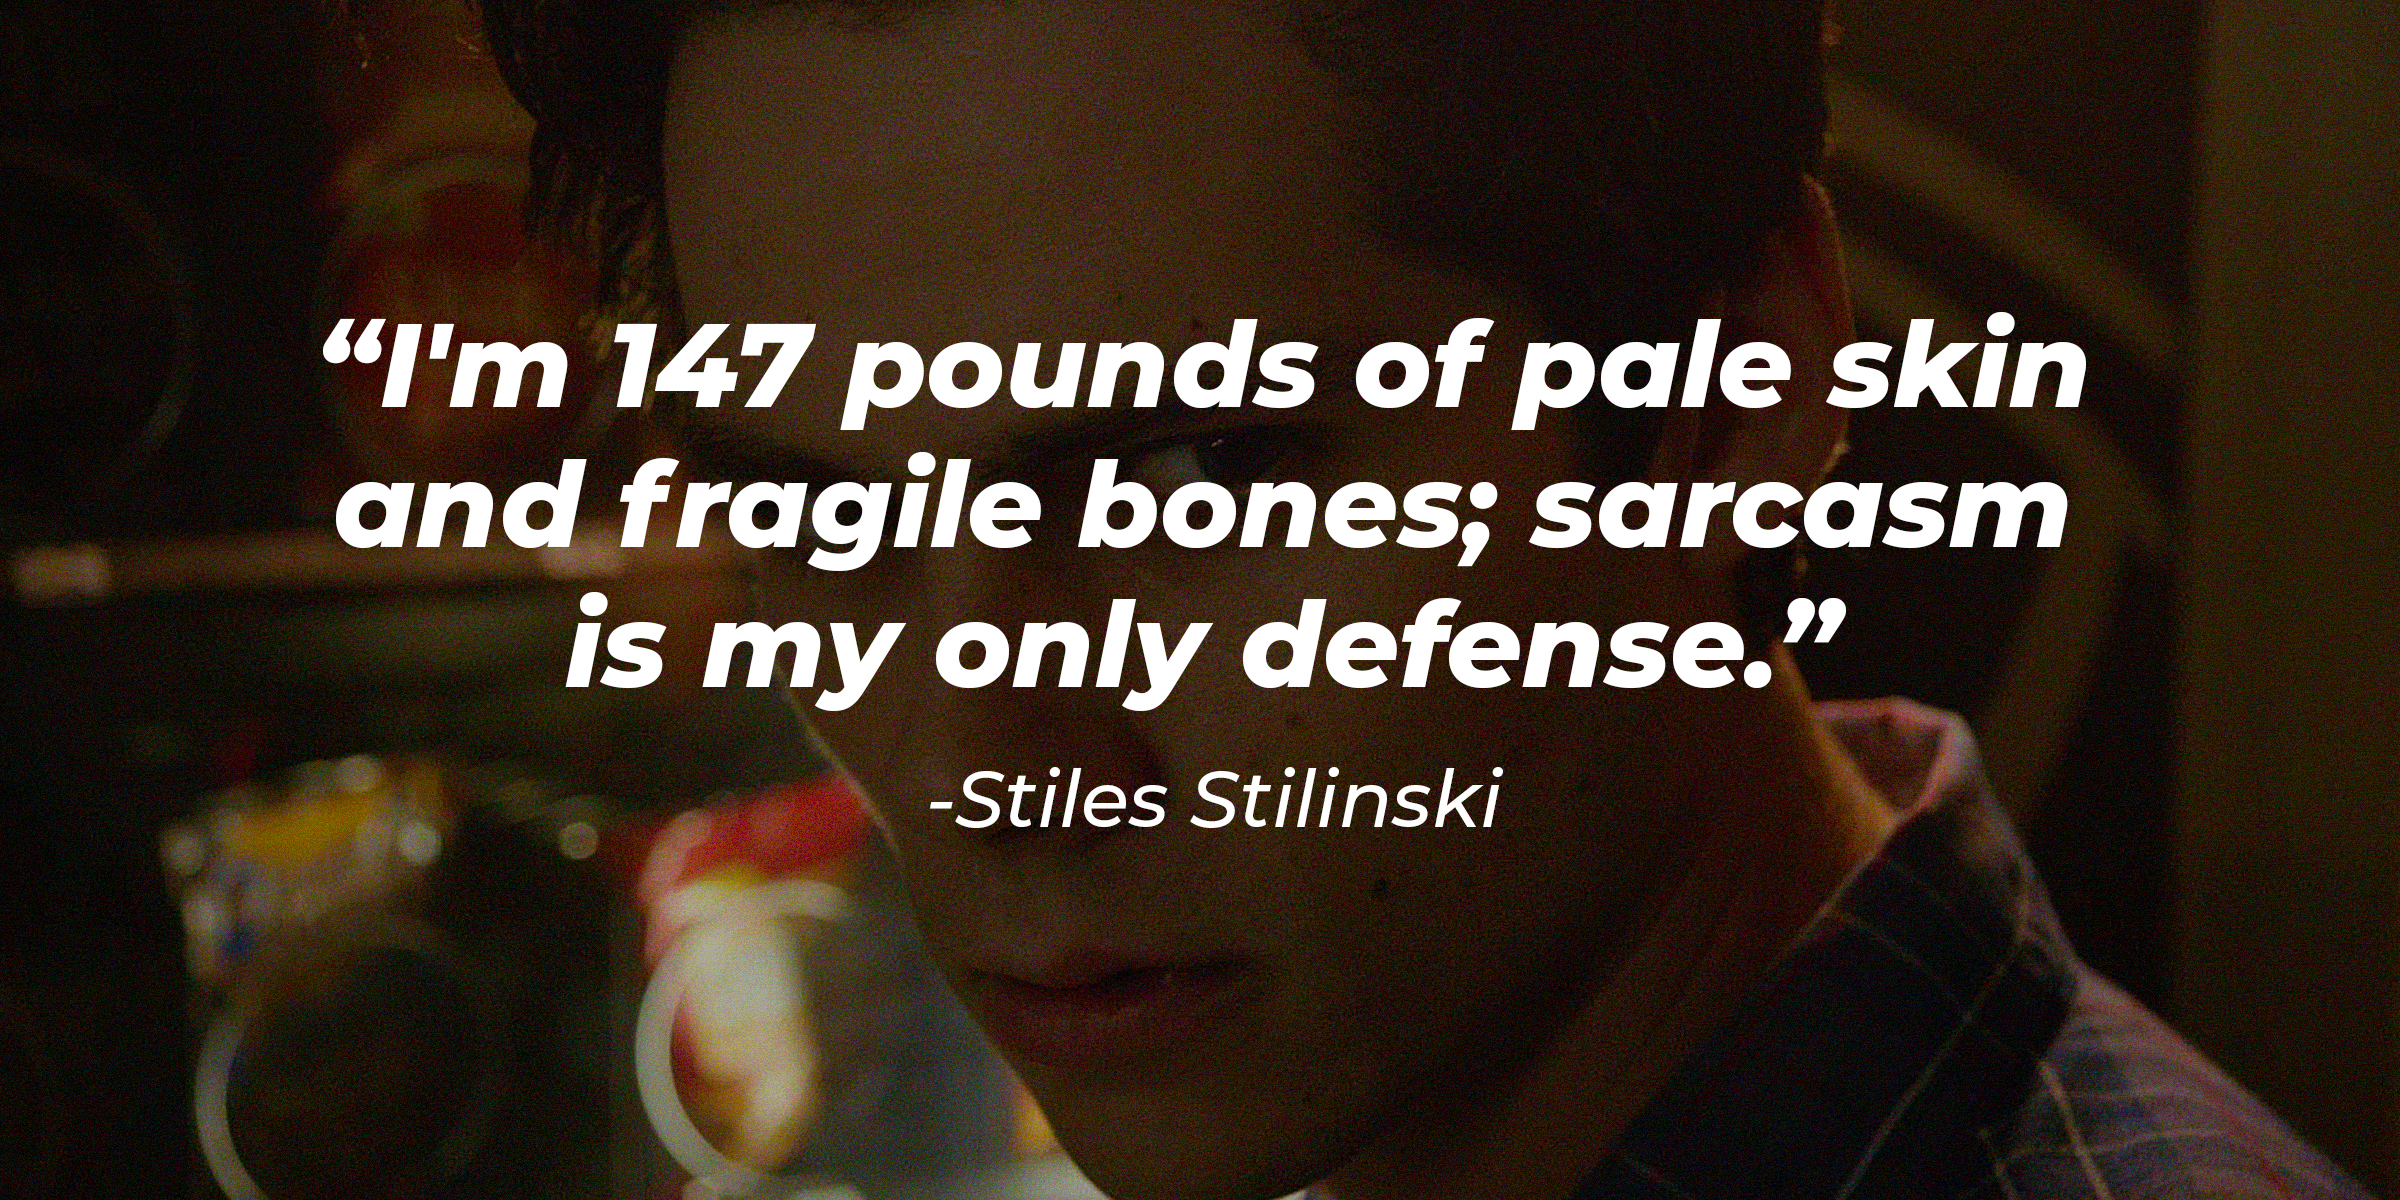 A photo of Stiles Stilinski with his quote, "I'm 147 pounds of pale skin and fragile bones; sarcasm is my only defense." | Source: Facebook/TeenWolf